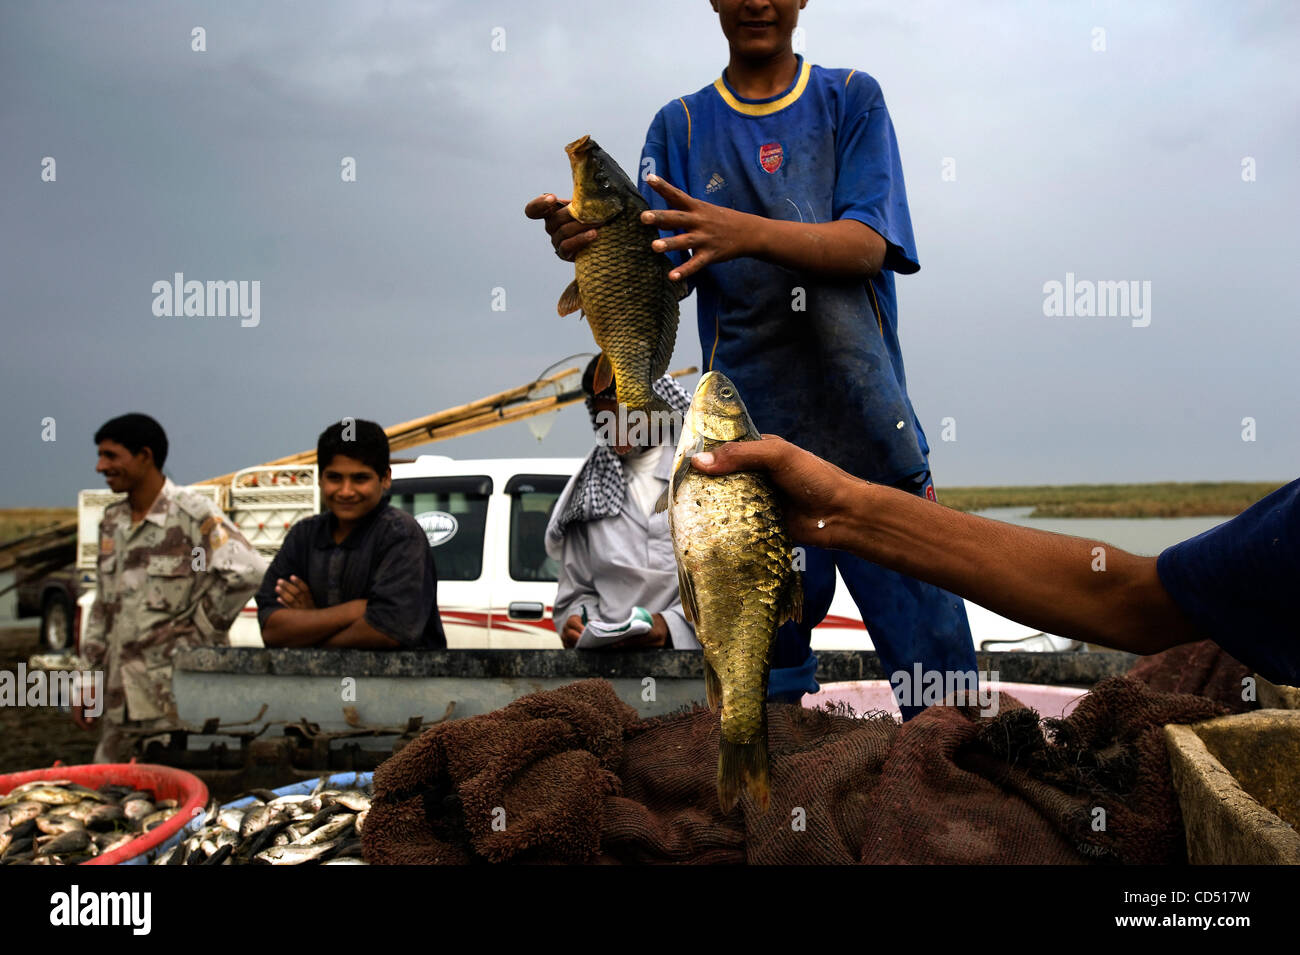 Oct. 29, 2008 - Al Hamar Marsh, Iraq - A group of young fishermen display their catch as it is loaded in trucks to be taken to market. Many of the estimated 500,000 inhabitants of the Iraq marshes were displaced after Saddam Hussein drained the marshes...The marsh Arabs were forced to leave their na Stock Photo